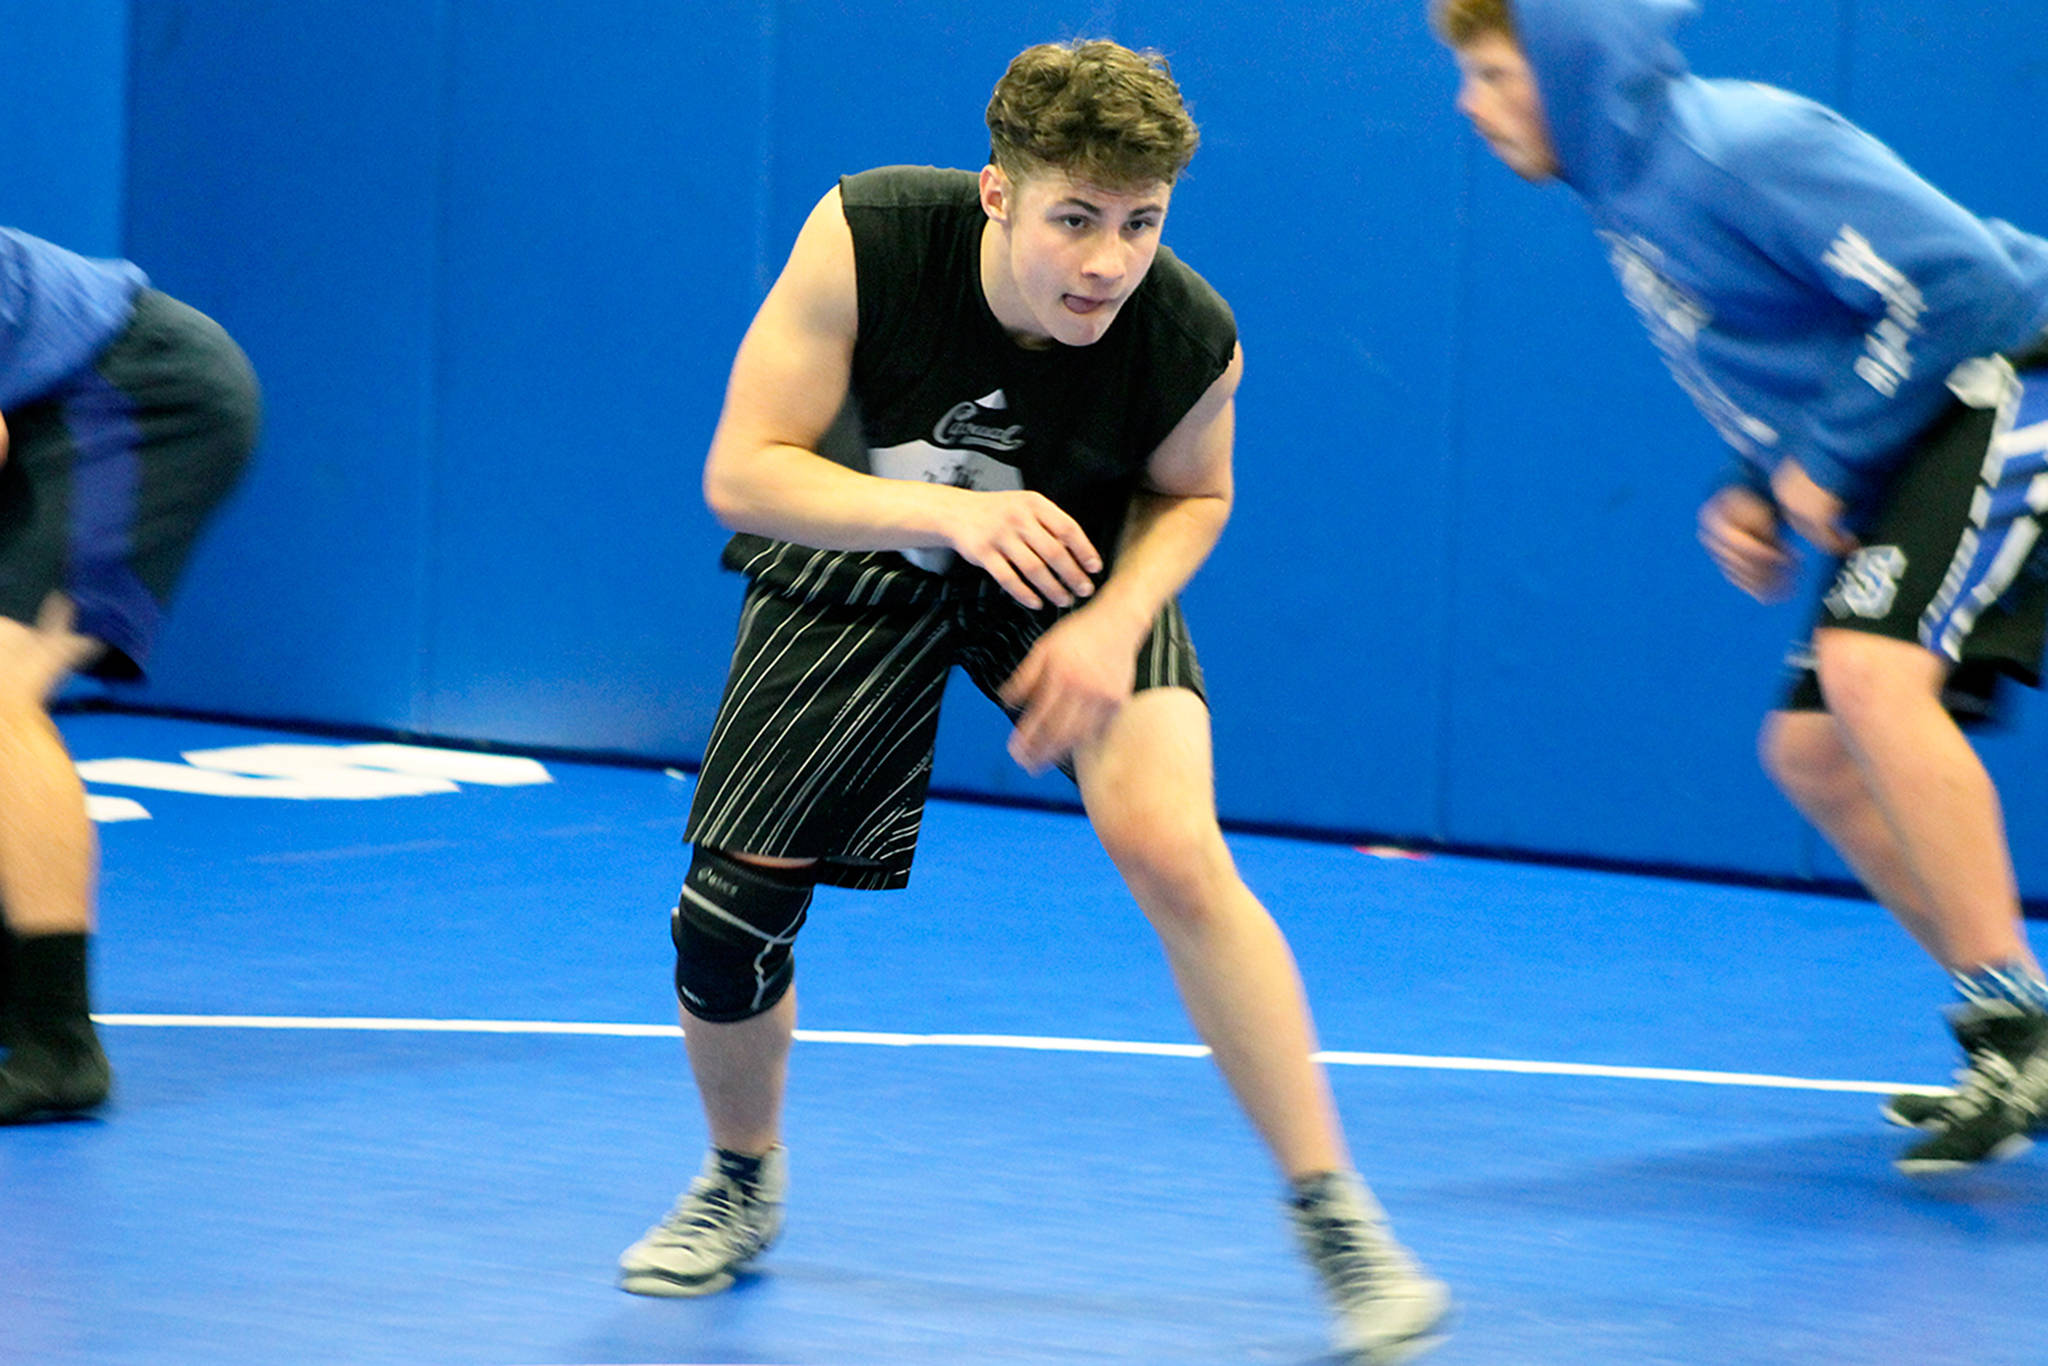 New year, new goals; South Whidbey grapplers set their sights high